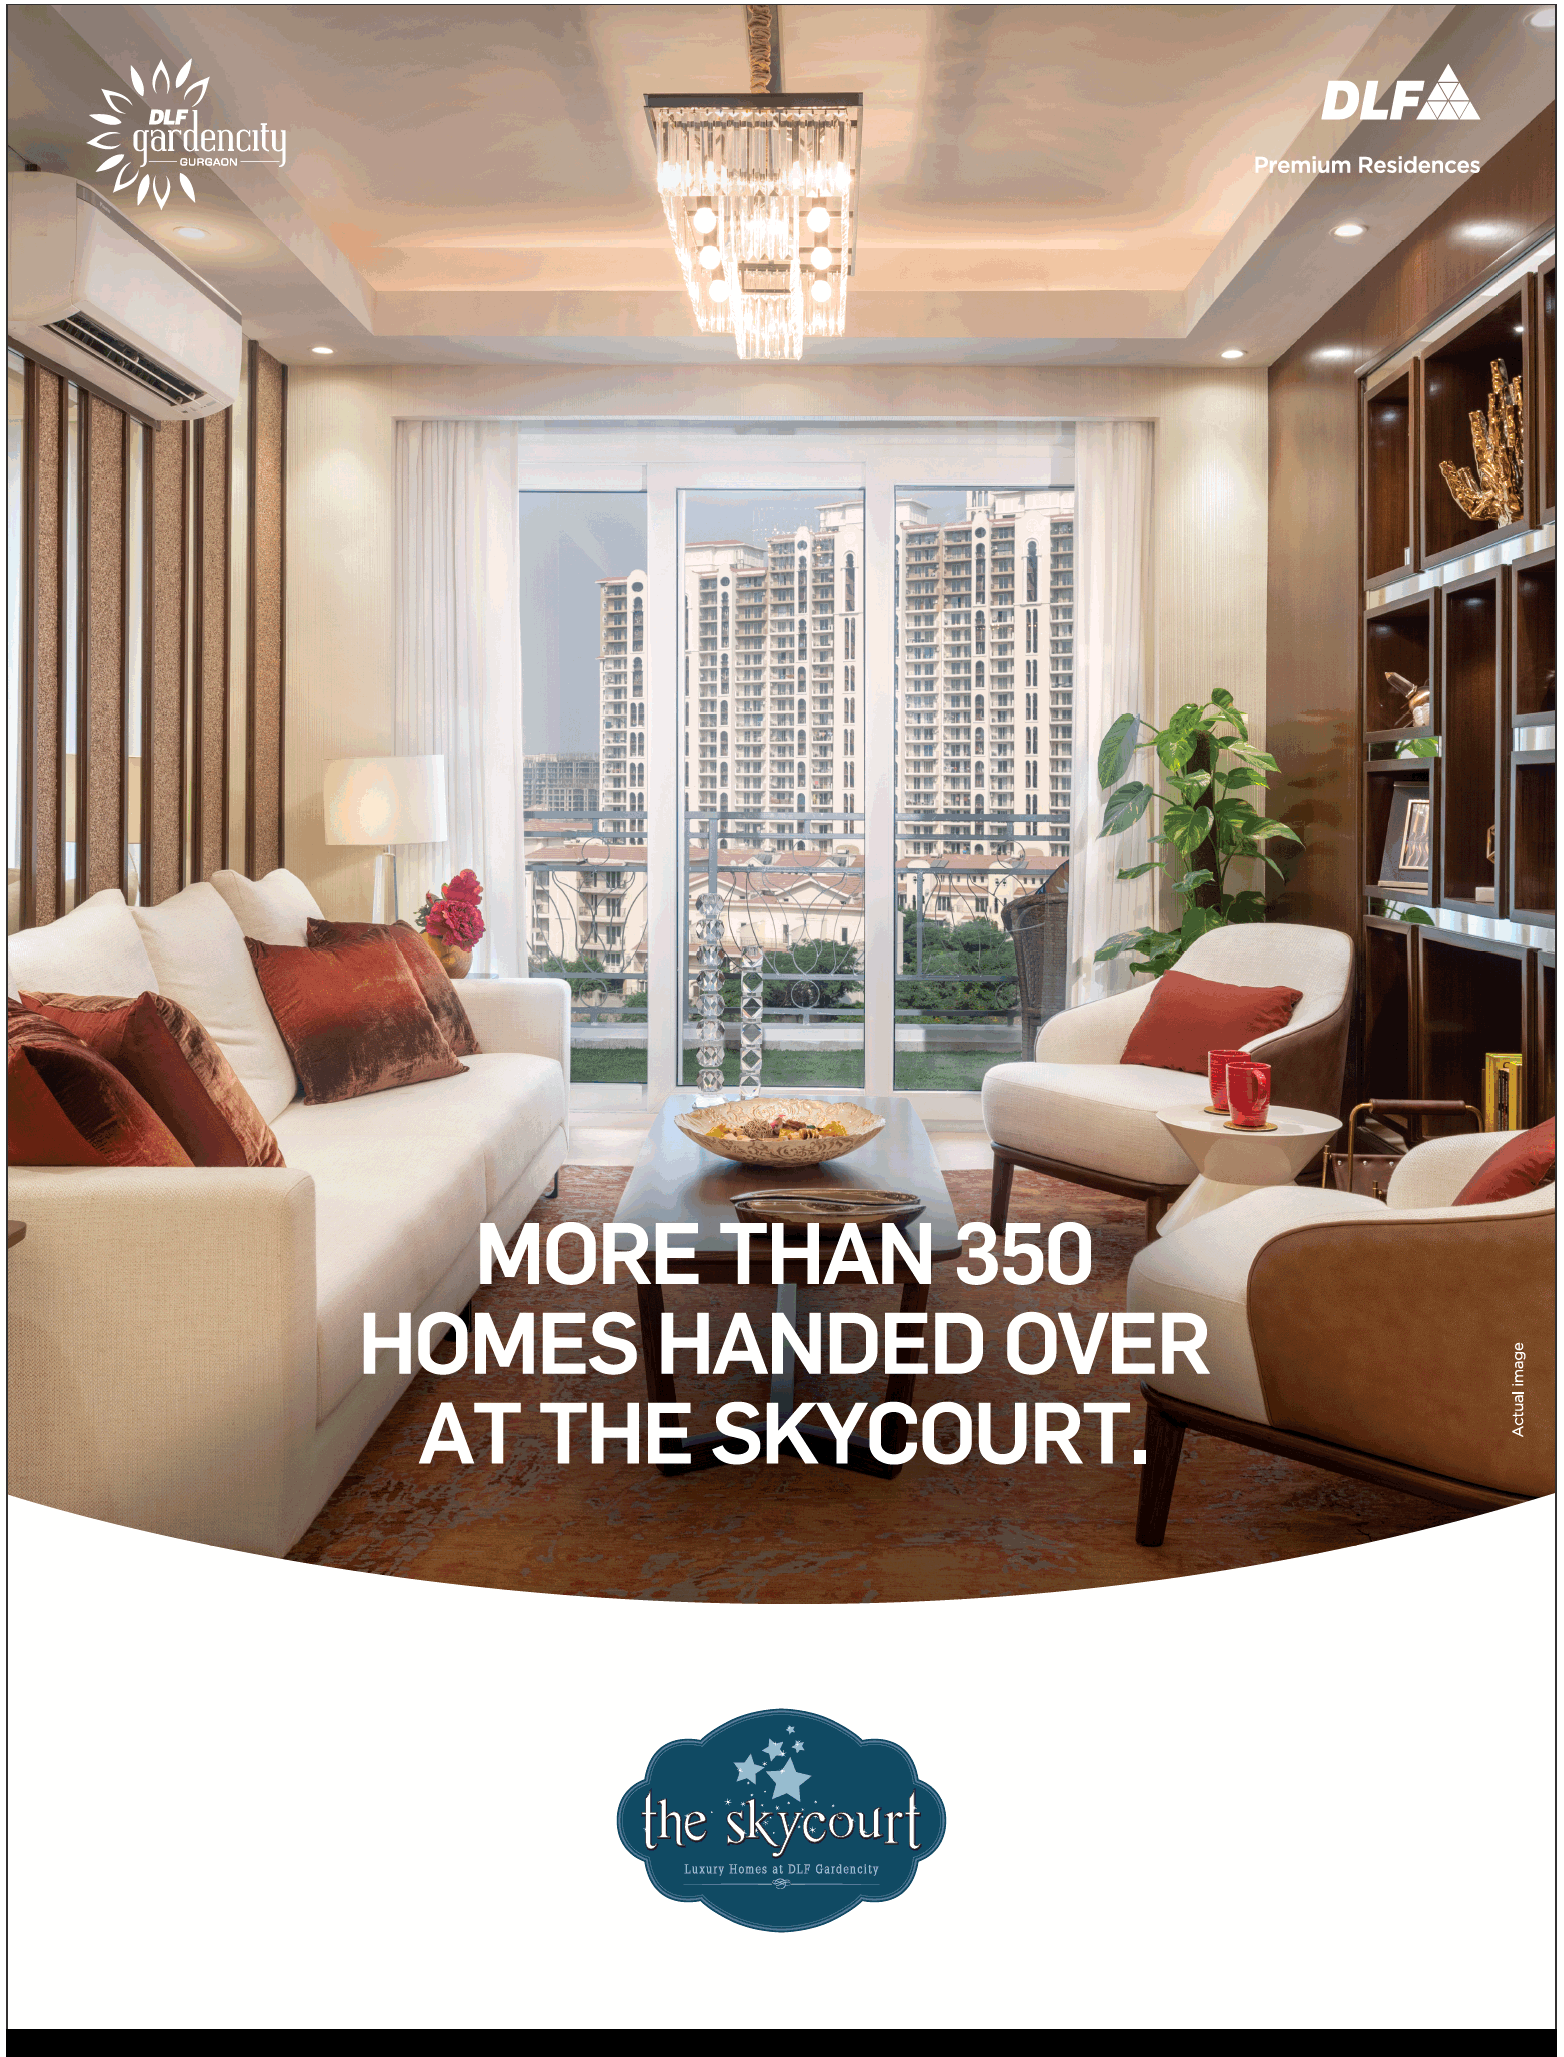 More than 350 homes handed over at DLF The Skycourt in Gurgaon Update